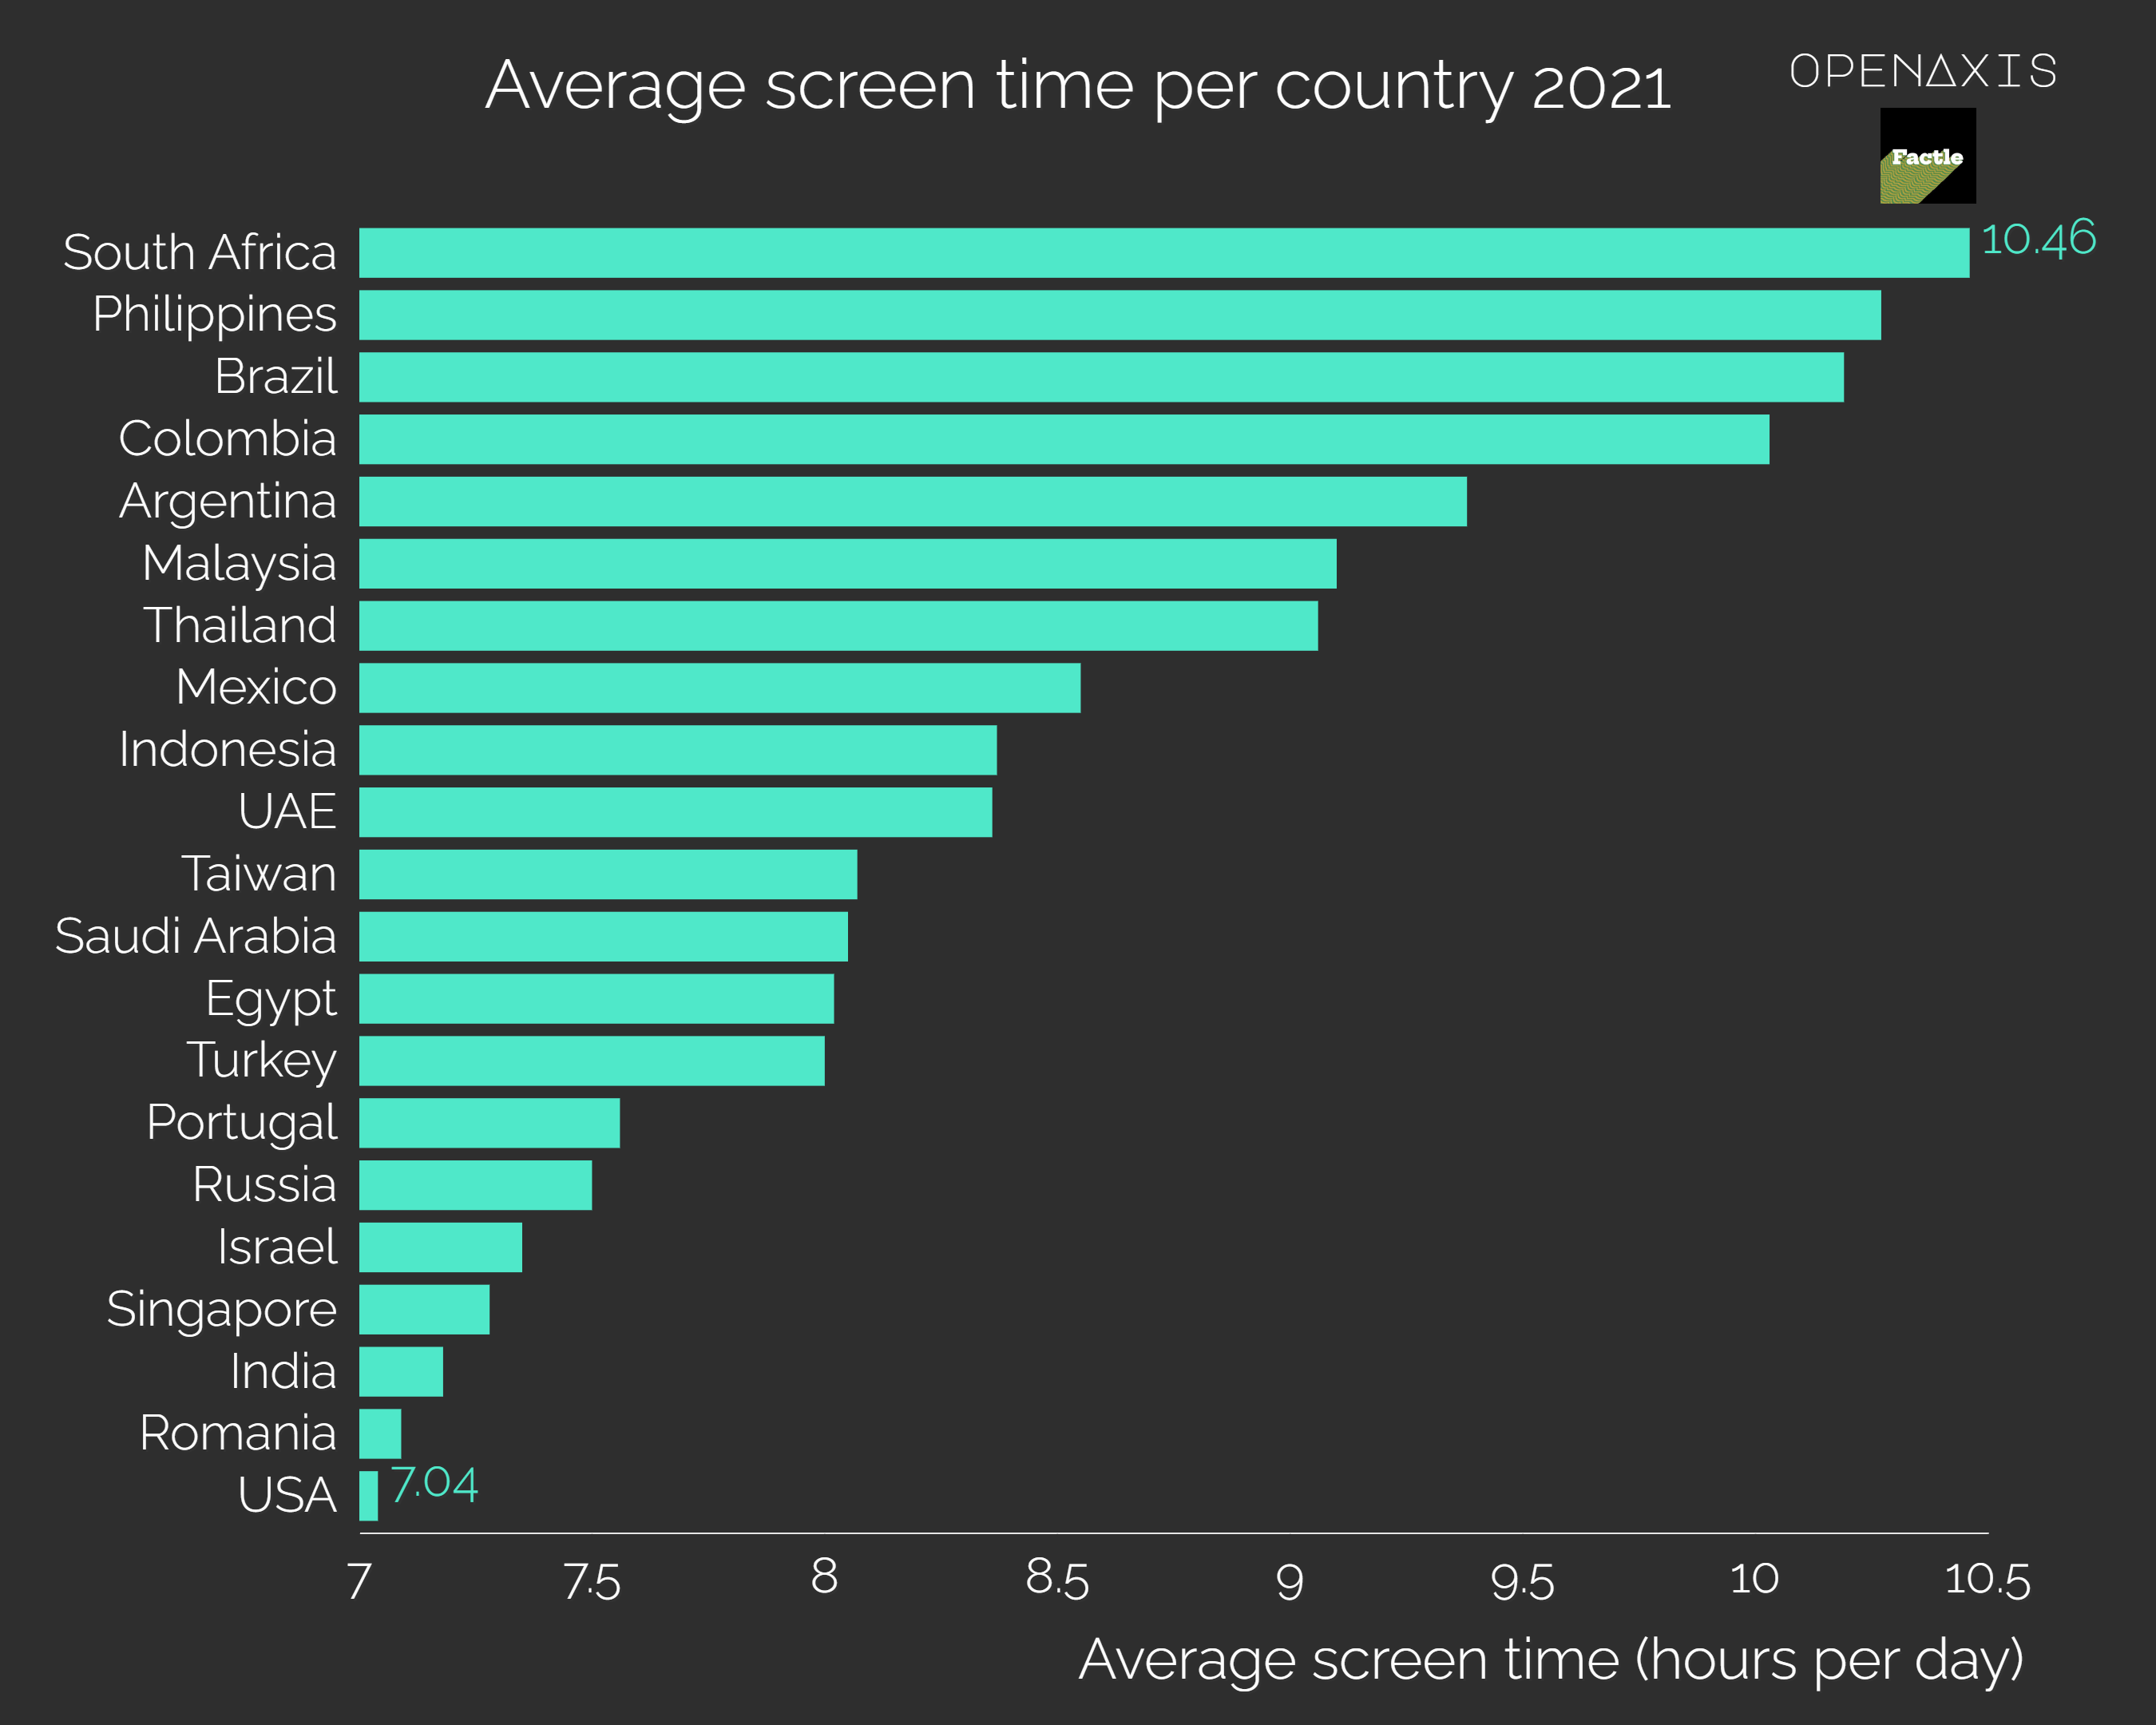 <p>Worldwide, the average person spends a total of 6 hours and 57 minutes looking at a screen each day (for internet-connected activities).</p><p><br /></p><p>The average American spends 7 hours and 4 minutes looking at a screen every day. This is slightly below the worldwide average and around 45 minutes longer than the British who average 6 hours and 12 minutes of screen time per day. </p><p><br /></p><p>But it is nearly four hours less than the biggest screen-time consumers, South Africans, who average around 10 hours and 46 minutes a day.</p><p><br /></p><p>On the whole, the biggest screen-time consumers are located in Africa, Asia, and South America.</p><p><br /></p><p>﻿<a href="/search?q=%23screentime" target="_blank">#screentime</a>﻿ ﻿<a href="/search?q=%23internet" target="_blank">#internet</a>﻿ </p><p><br /></p><p>Source: <a href="/data/3699" target="_blank">DataReportal</a></p><p><br /></p>